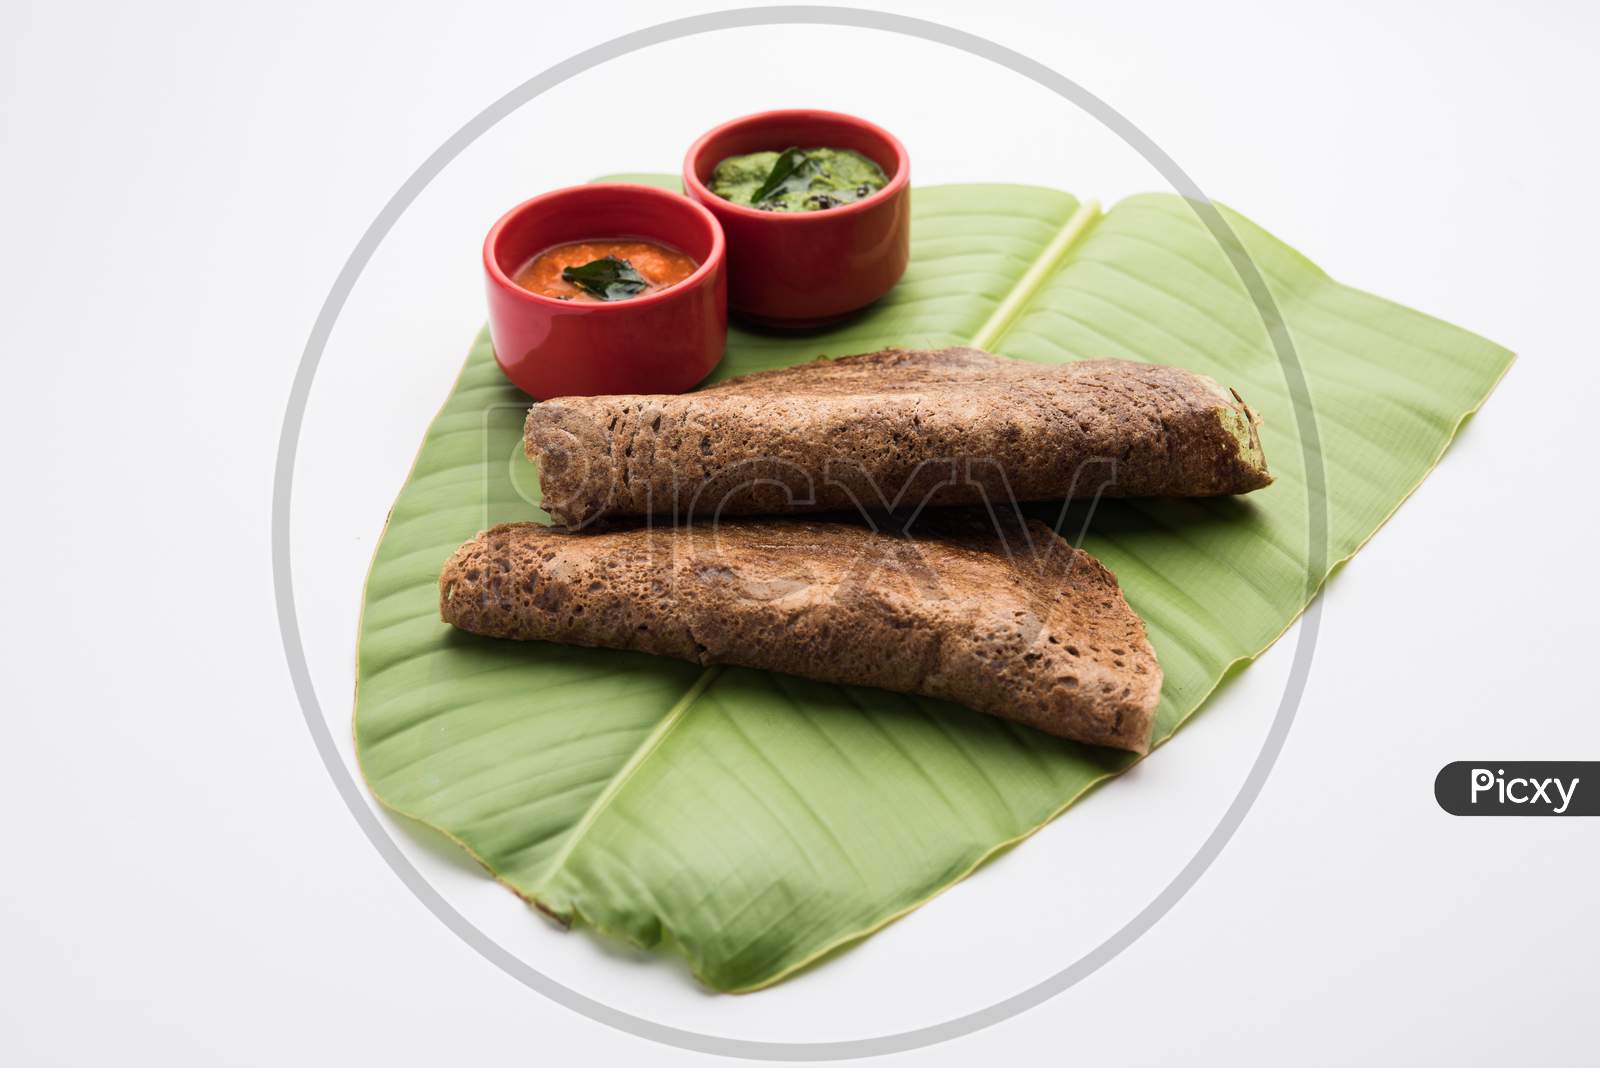 Ragi Dosa Made Using Batter Of Finger Millet Is A Healthy Indian Breakfast Served With Chutney